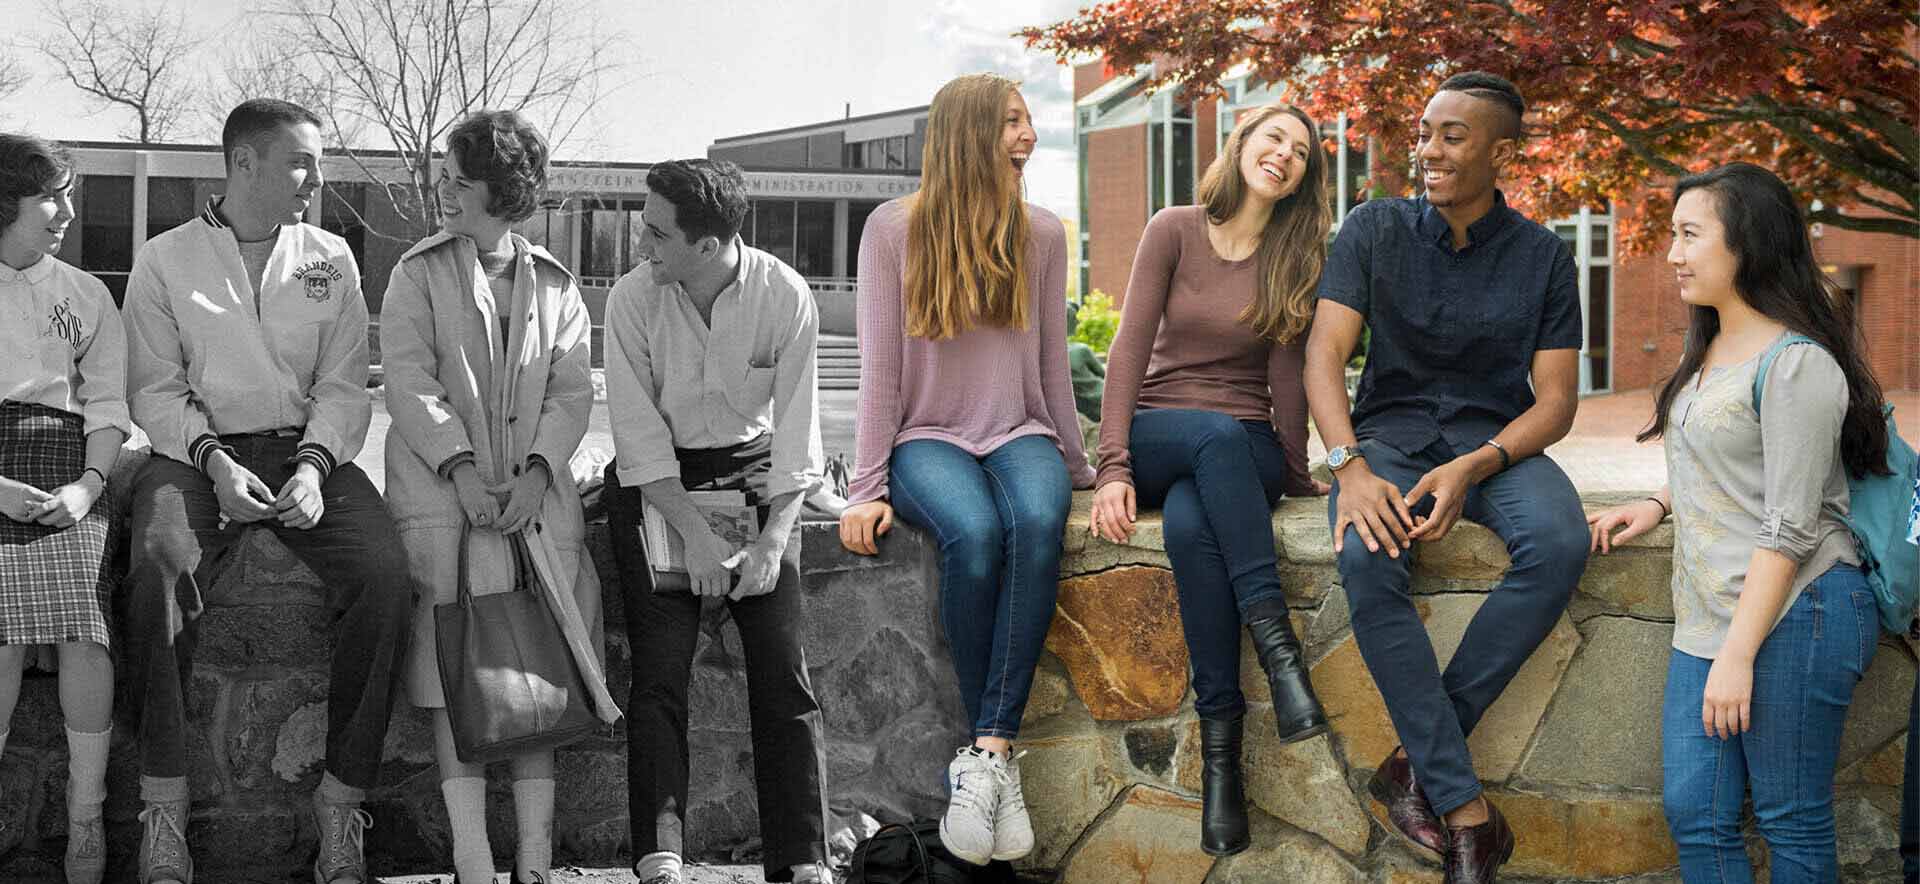 Black and white photo of four people on the Brandeis campus positioned next to a color photo of four people on the Brandeis campus